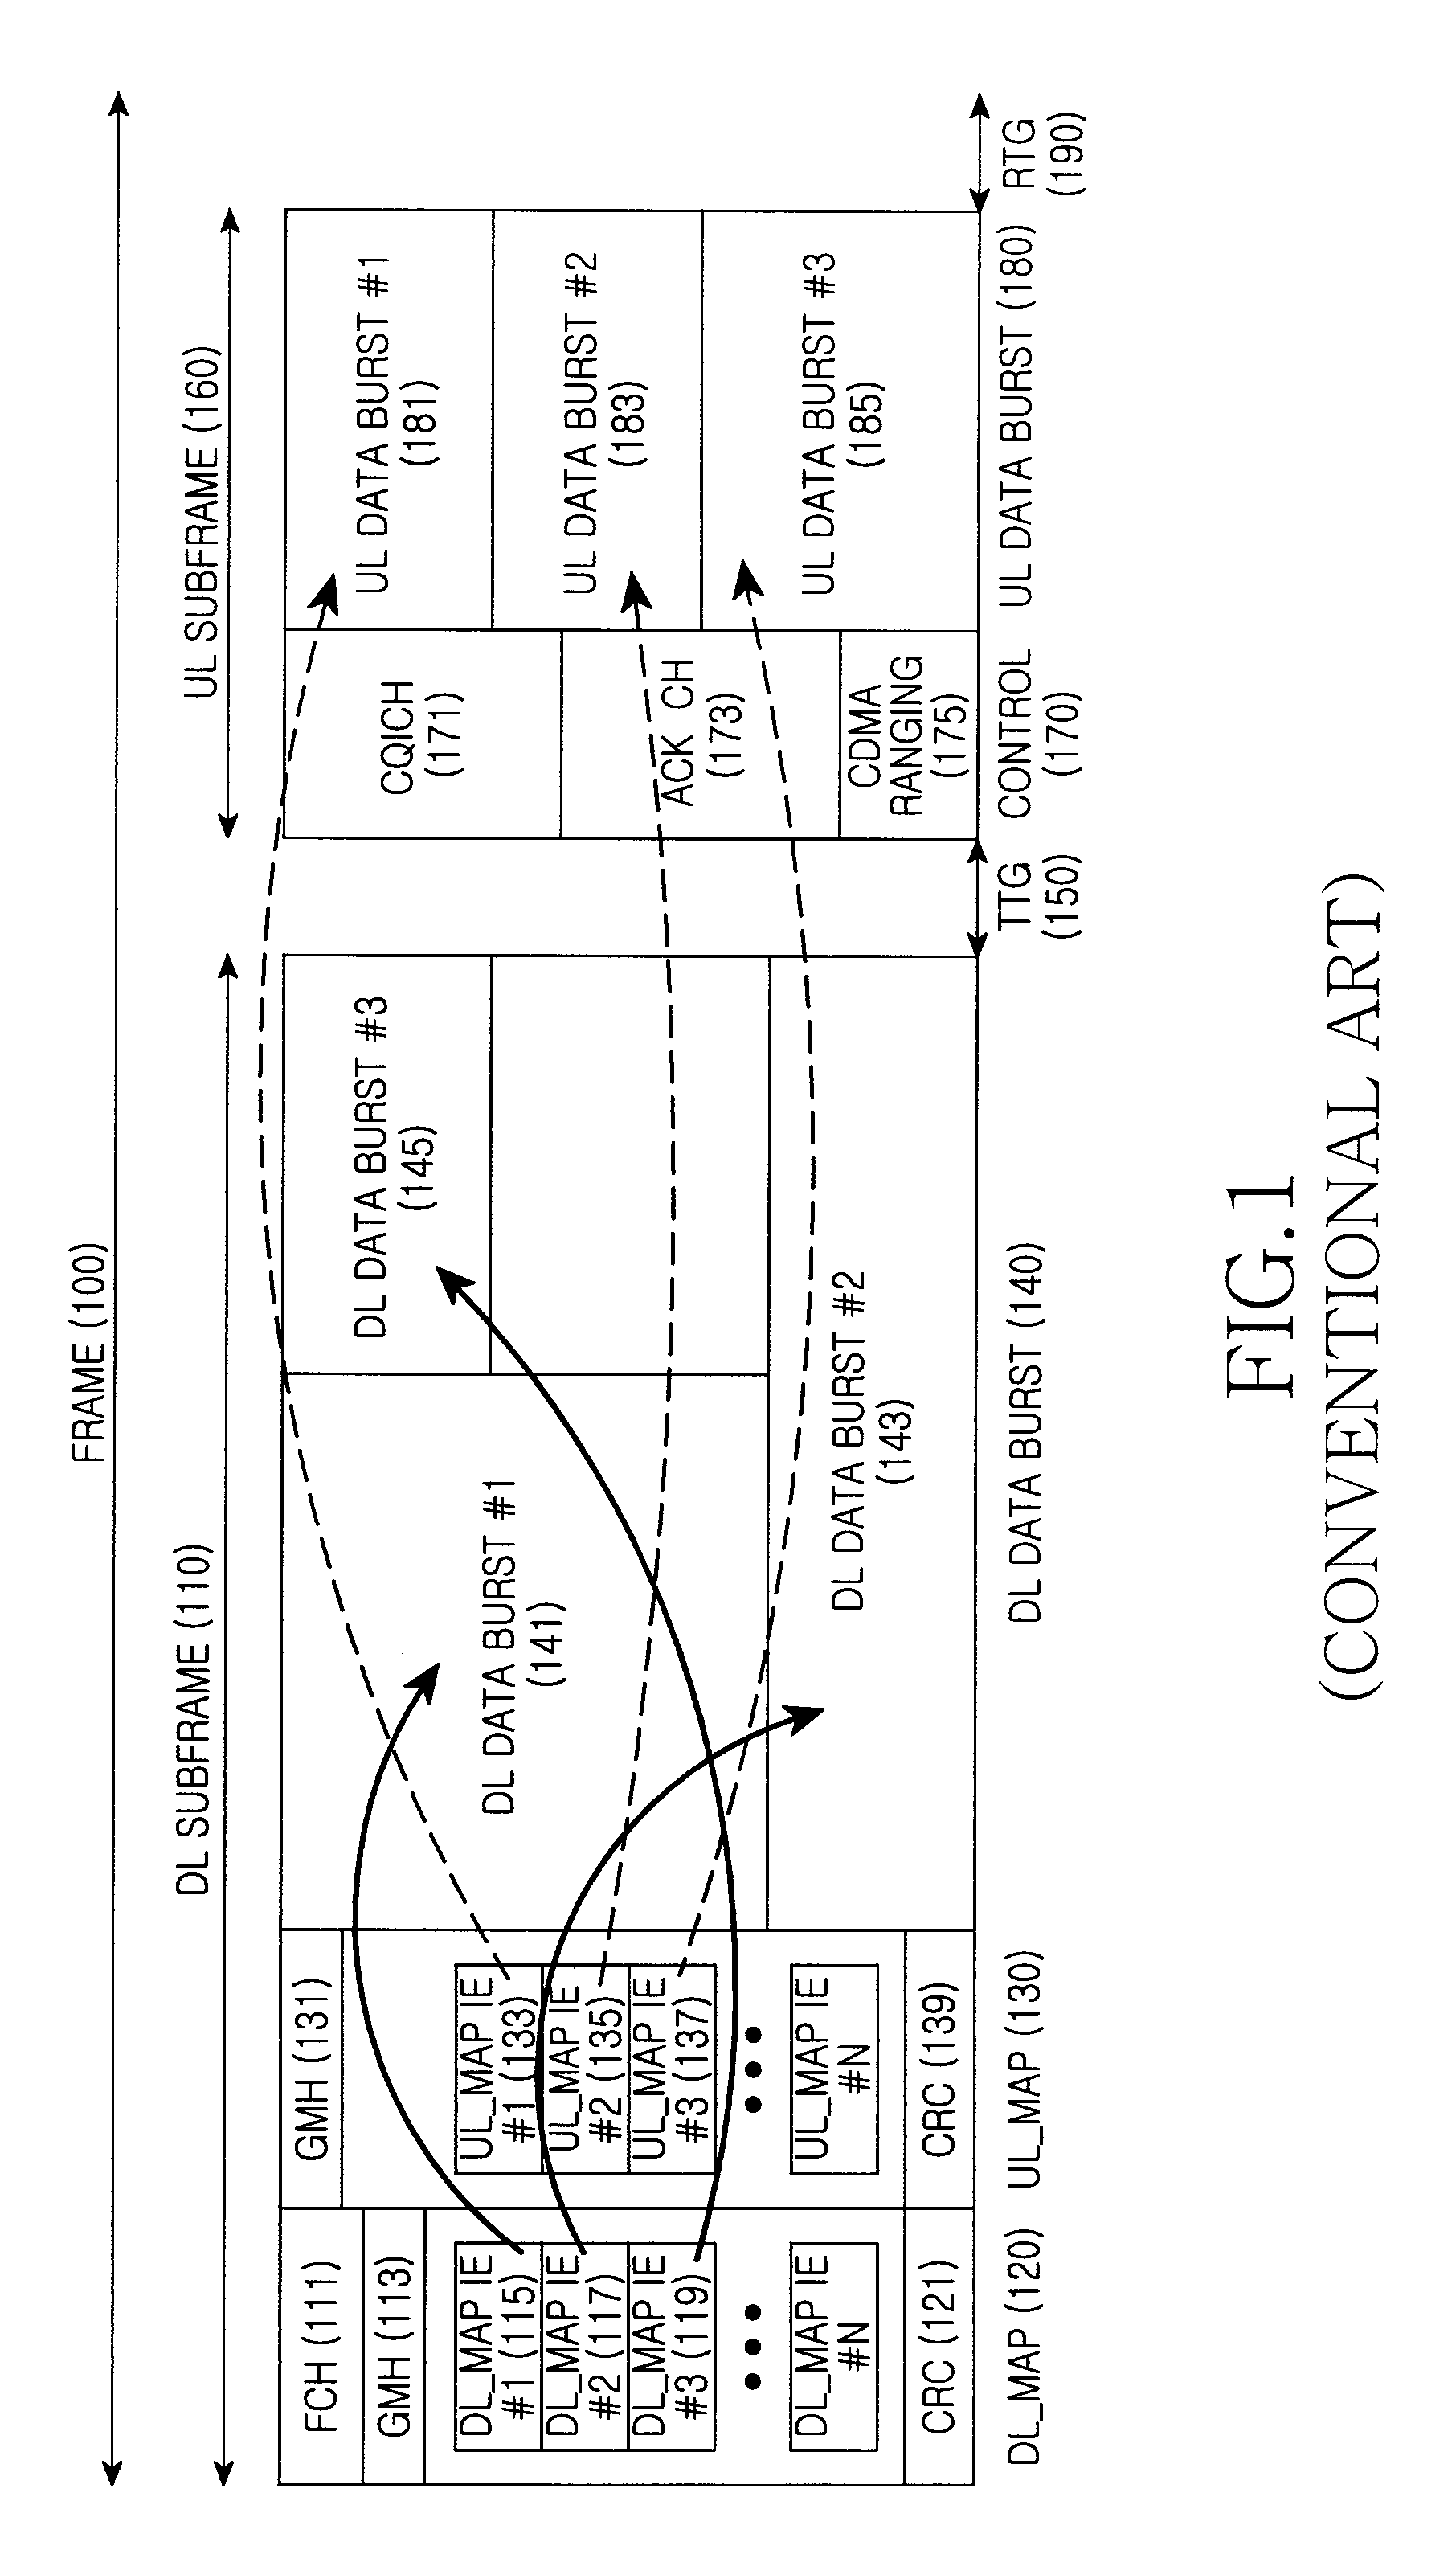 System and method for allocating resources in a communication system